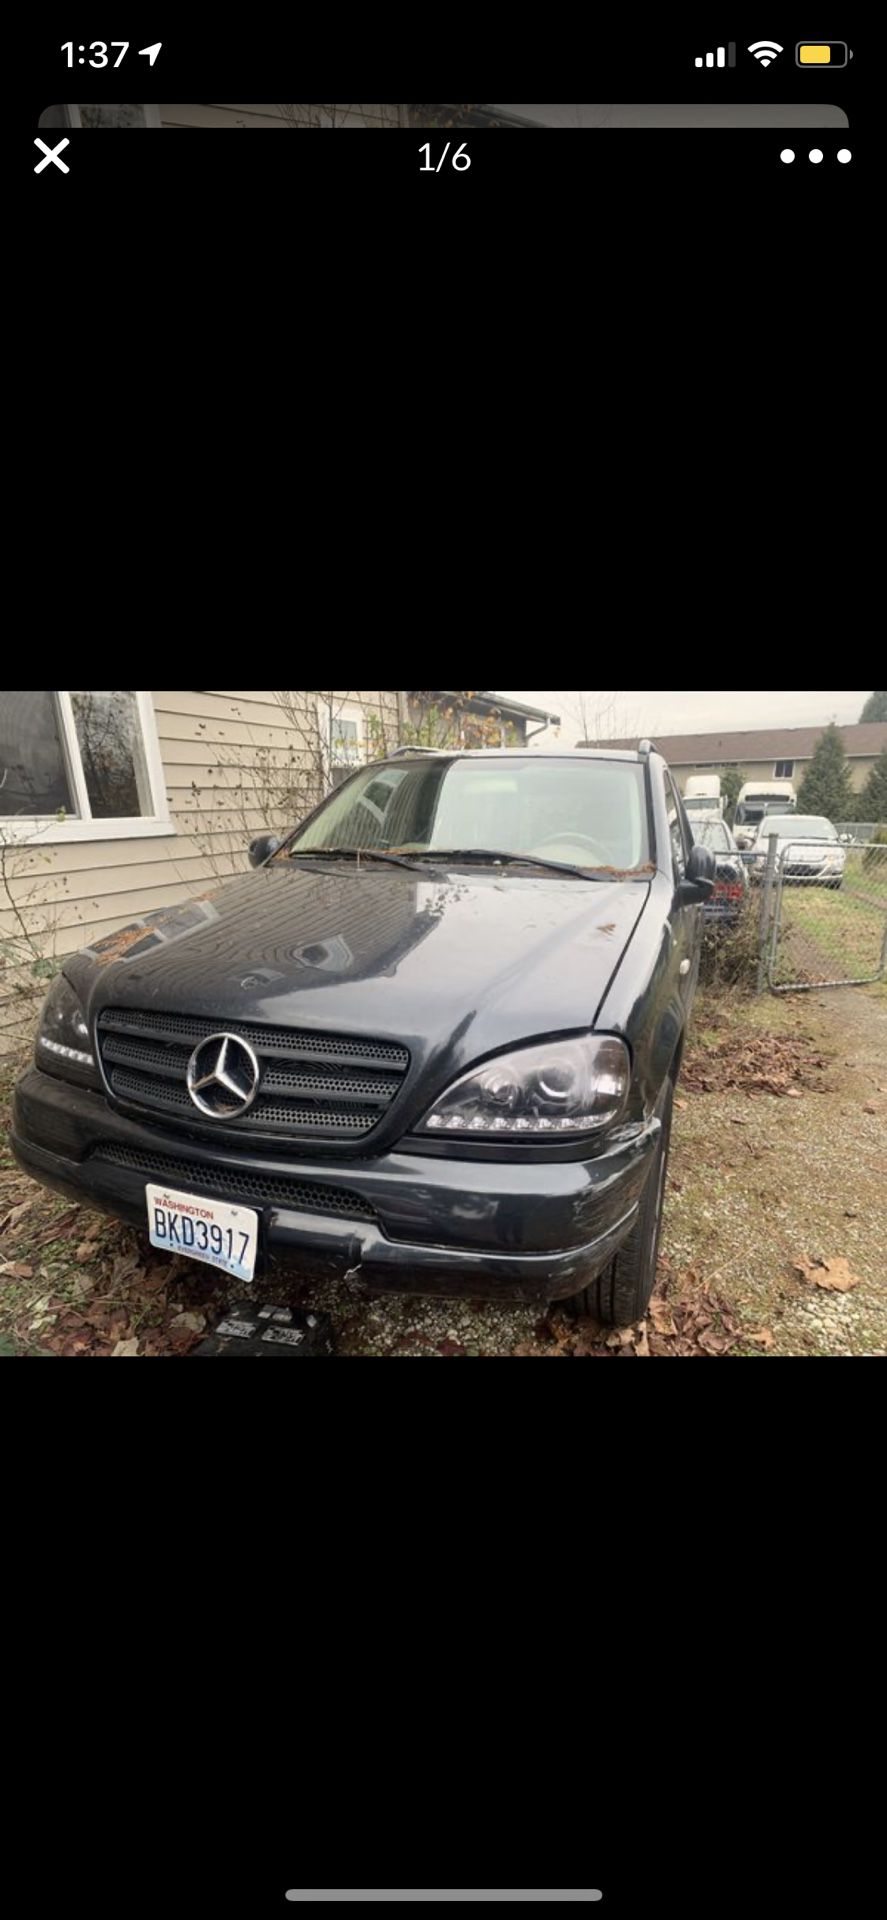 CHEAP PRICESS!!!! 2000 MERCEDES-BENZ ML430 COMPLETE PART OUT